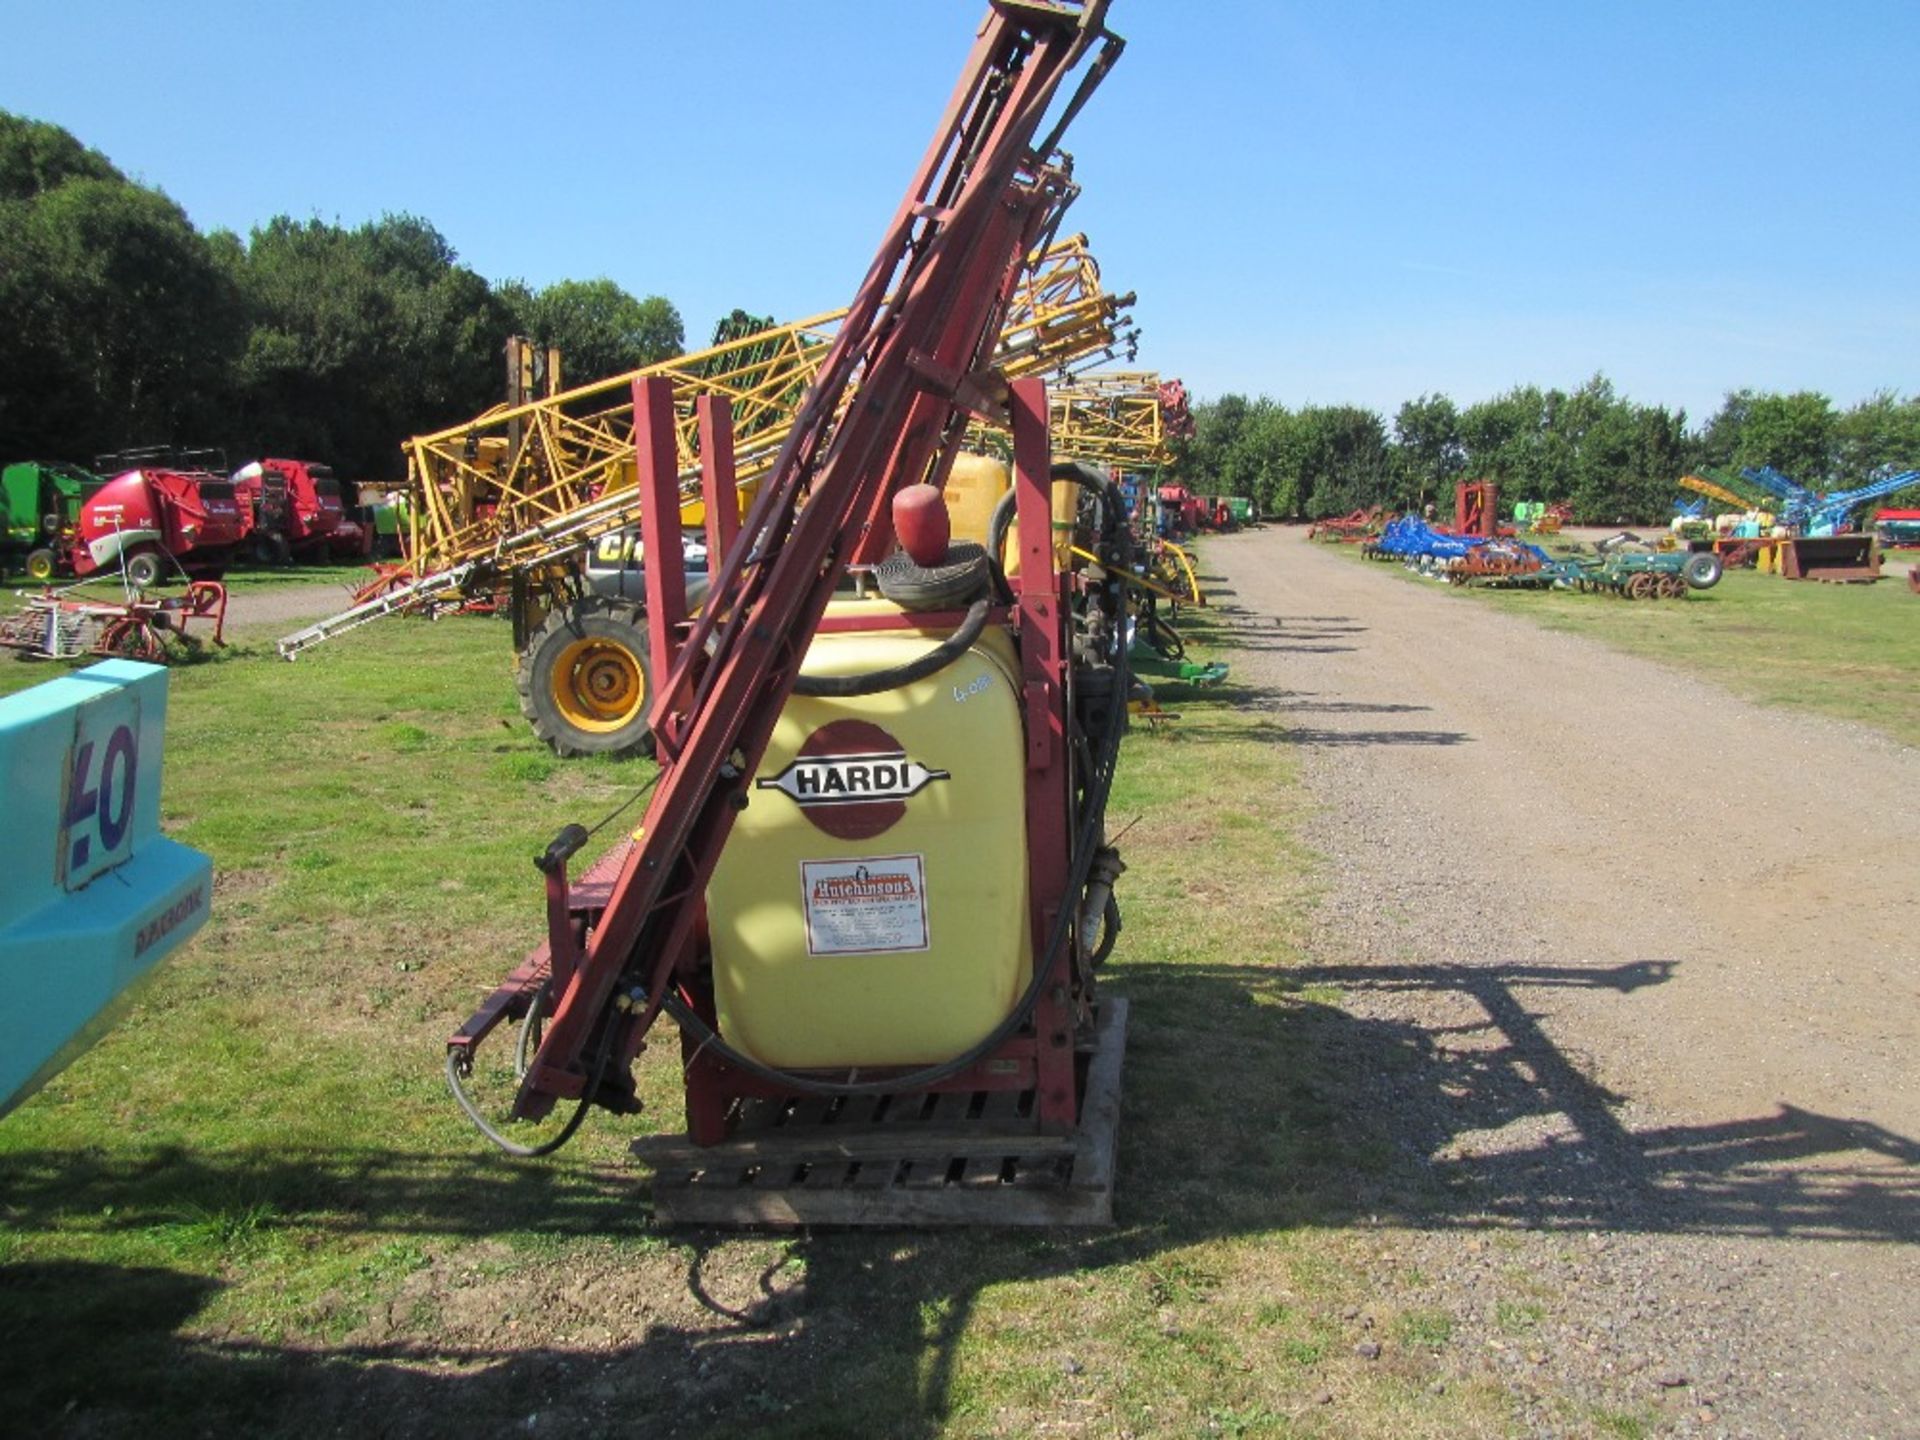 Hardi 12m Sprayer with Hyd Lift, Booms & Induction Hopper - Image 2 of 5